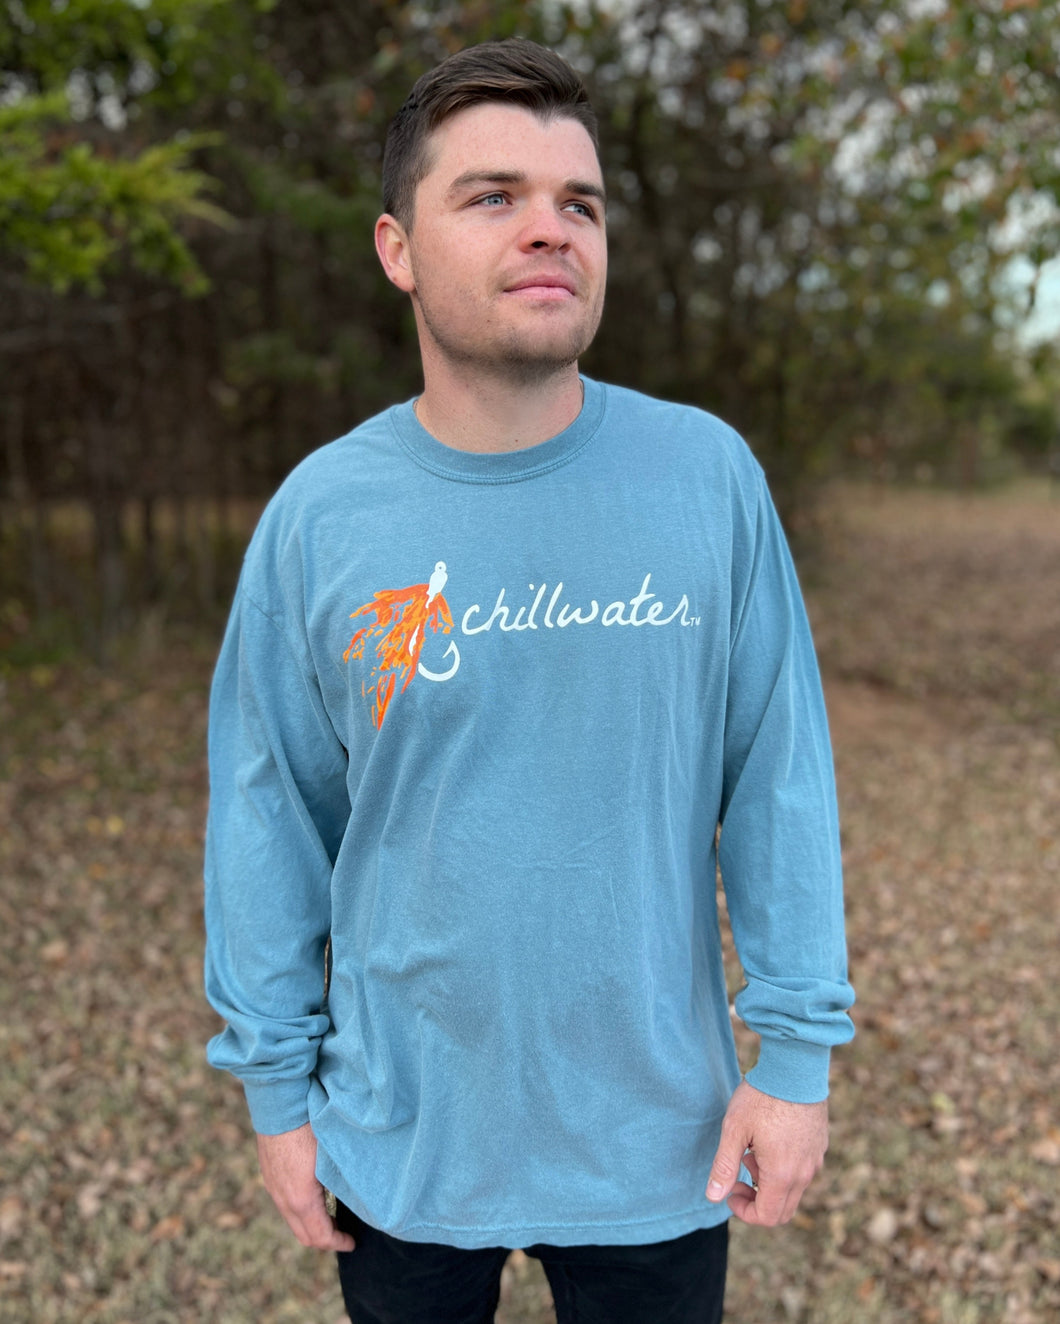 Young male wearing a cornflower blue long sleeve tee Hook and Fly design by Chillwater. The front resembles a fishing hook and fly with Chillwater written across.